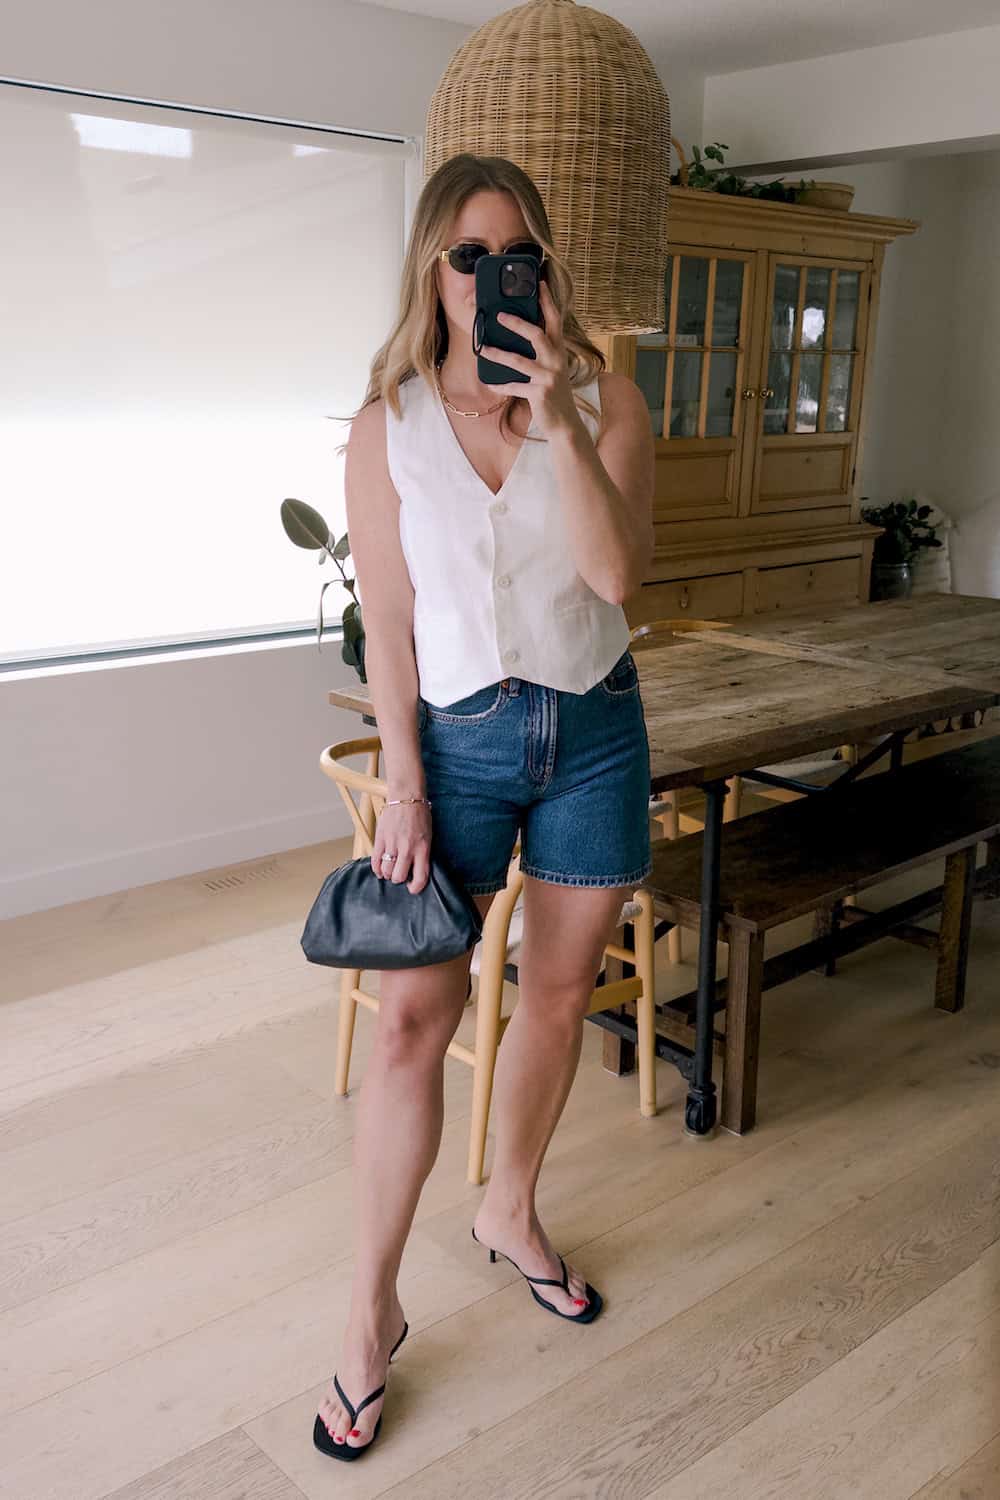 Christal wearing denim shorts with a white vest top and black sandal heels.